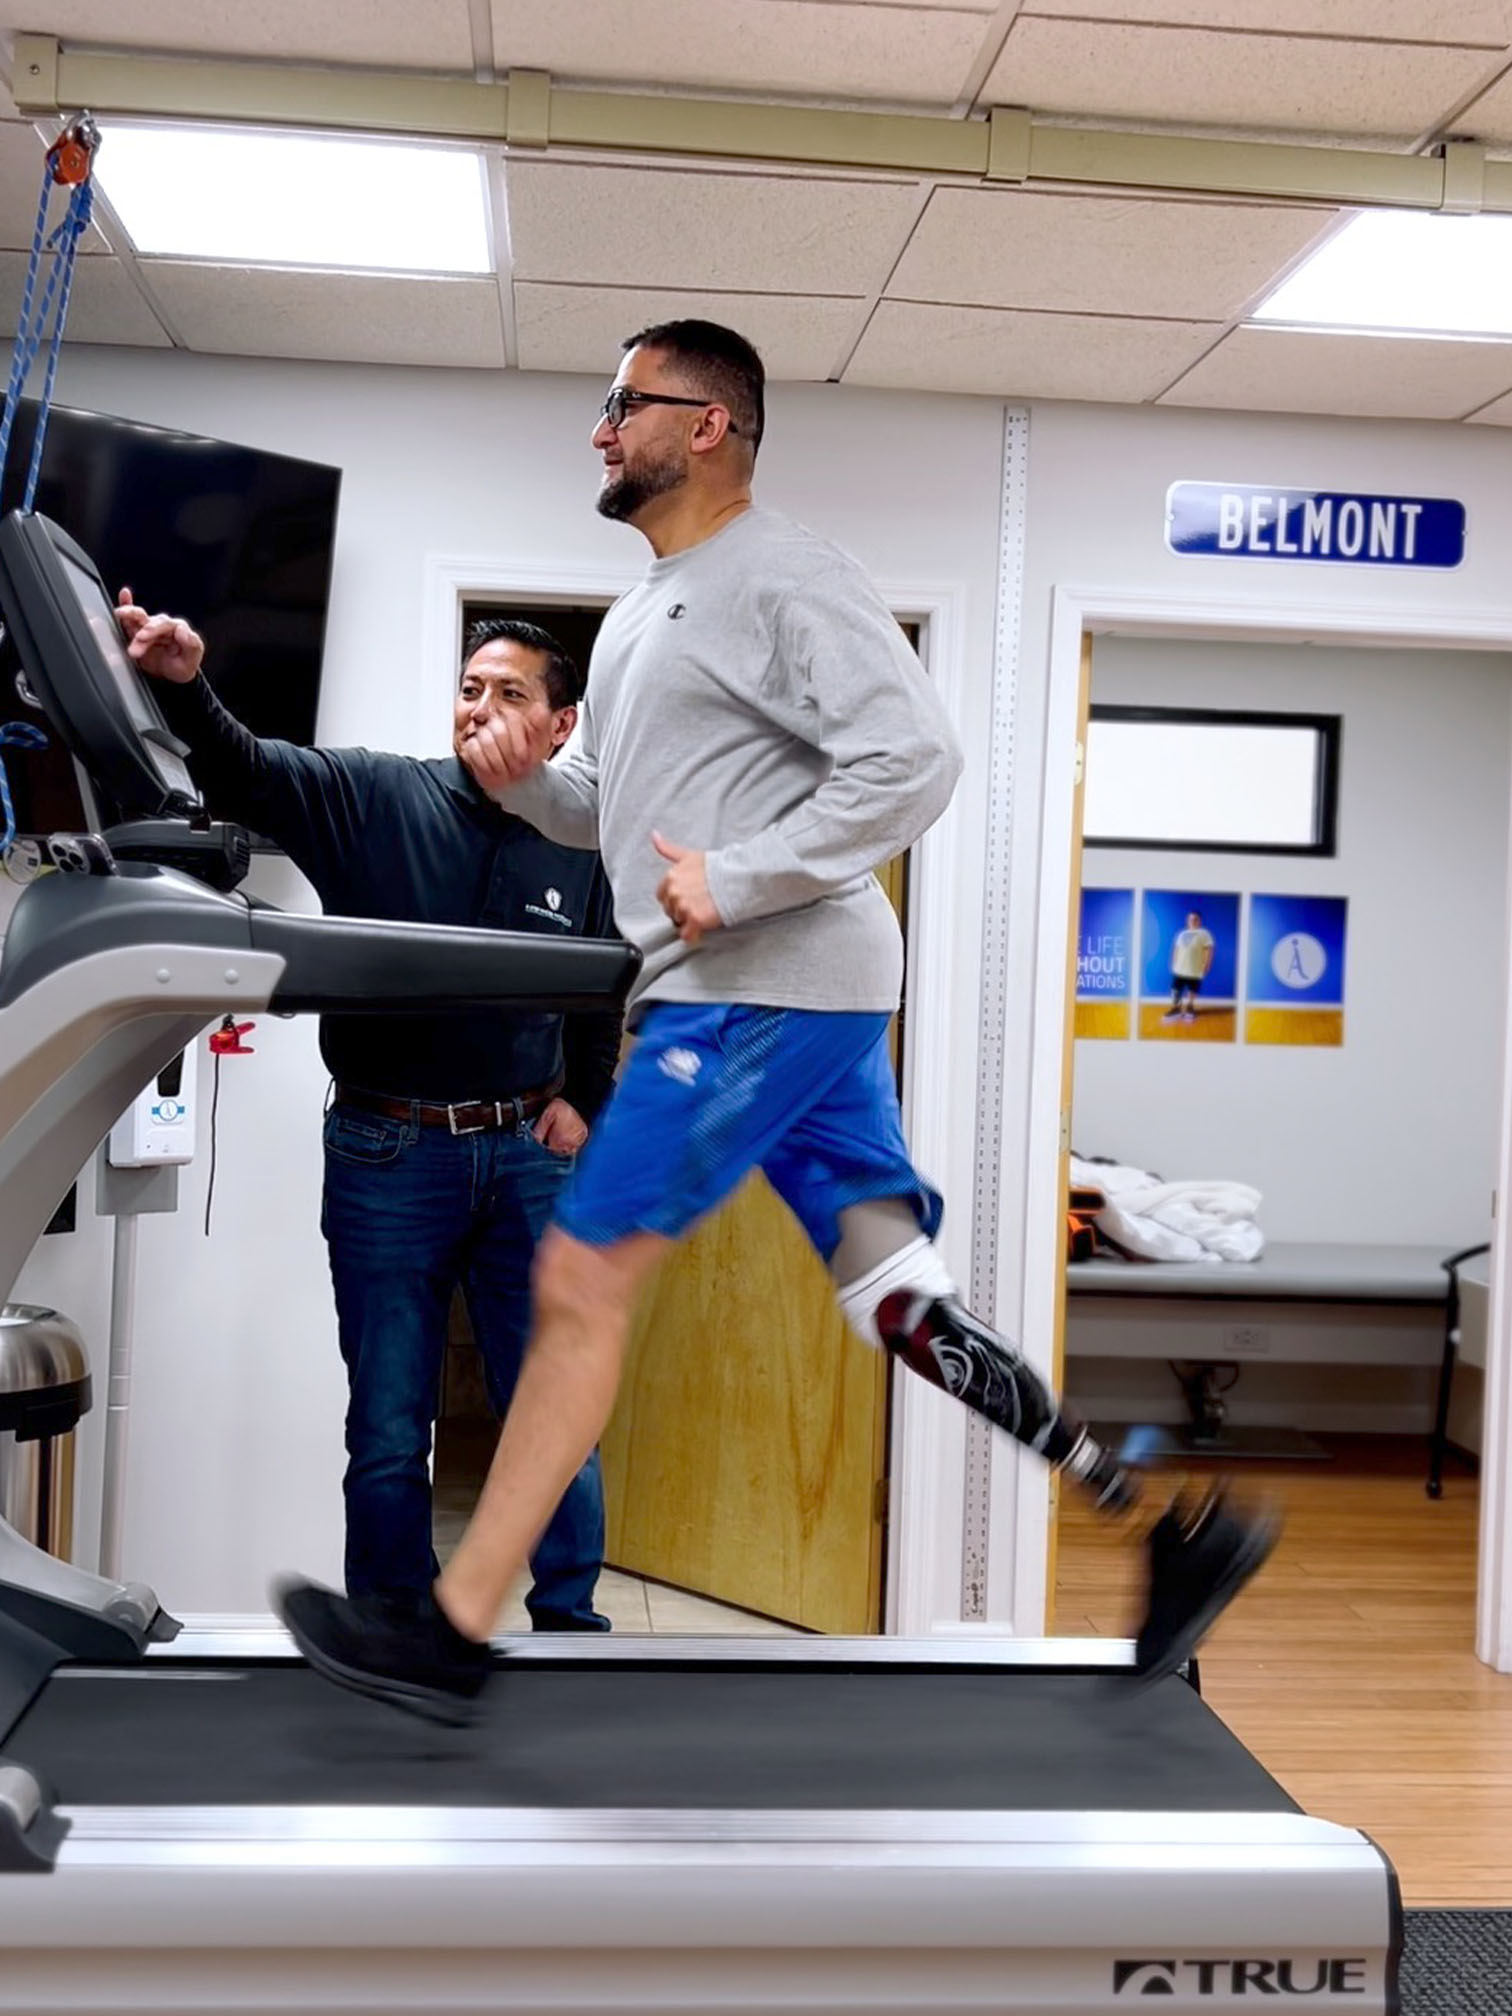 Below Knee Amputee maxing out the treadmill.